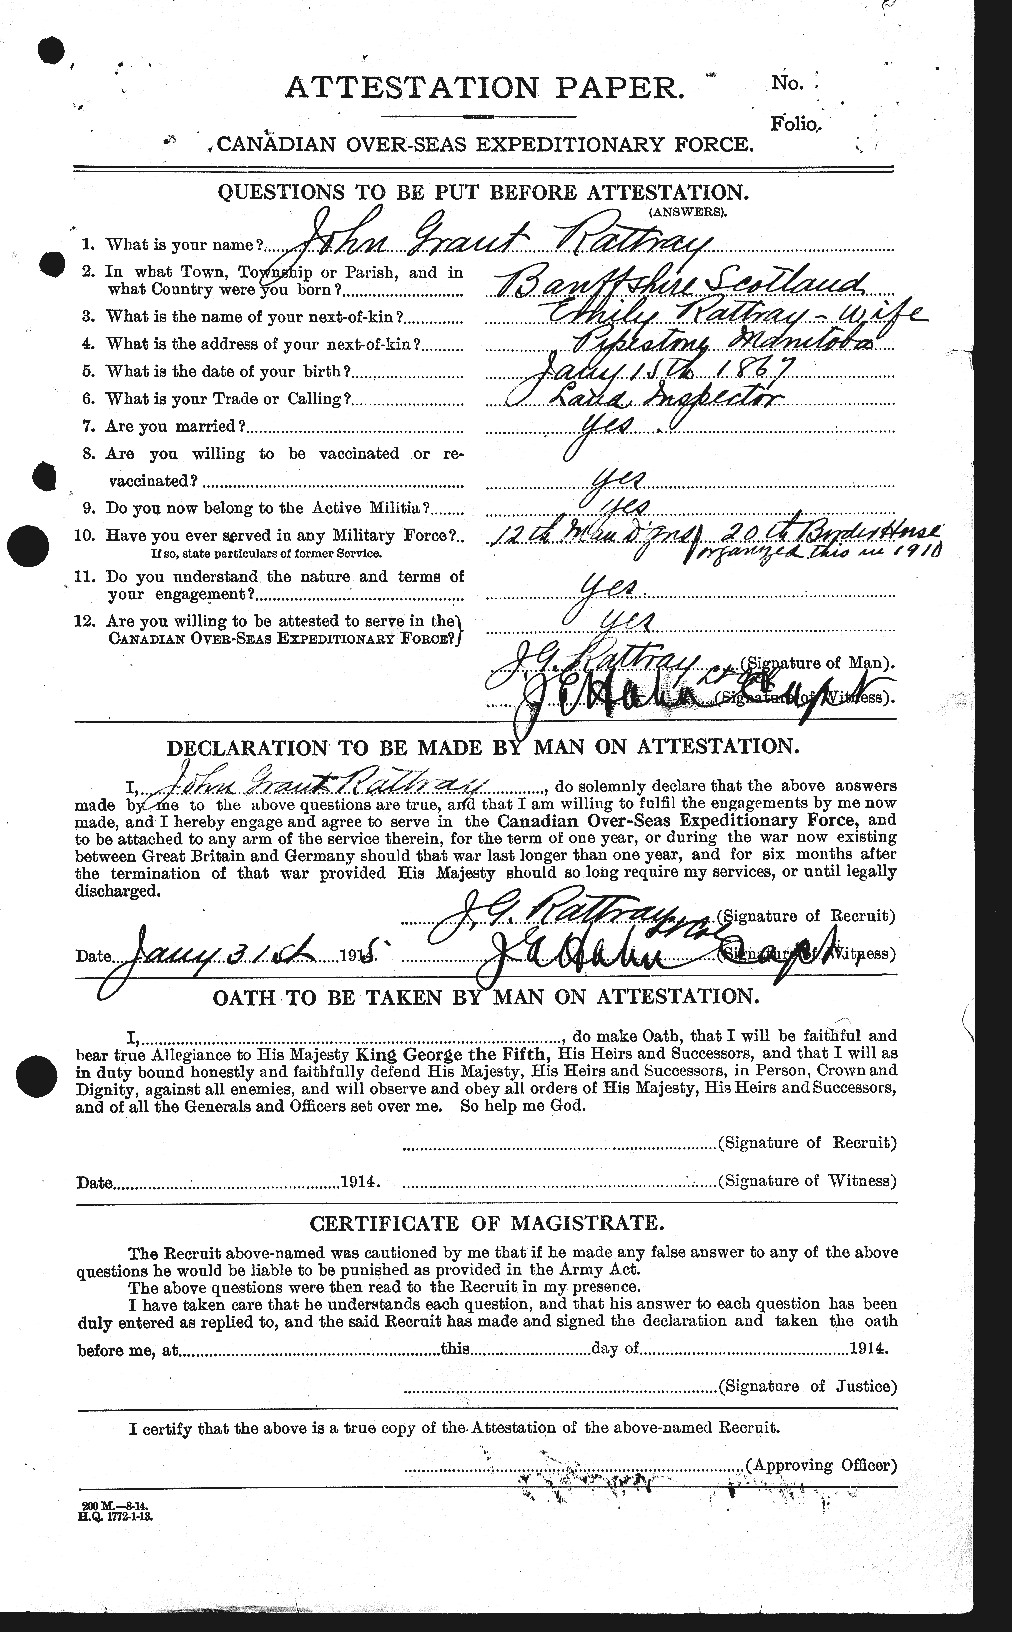 Personnel Records of the First World War - CEF 595702a